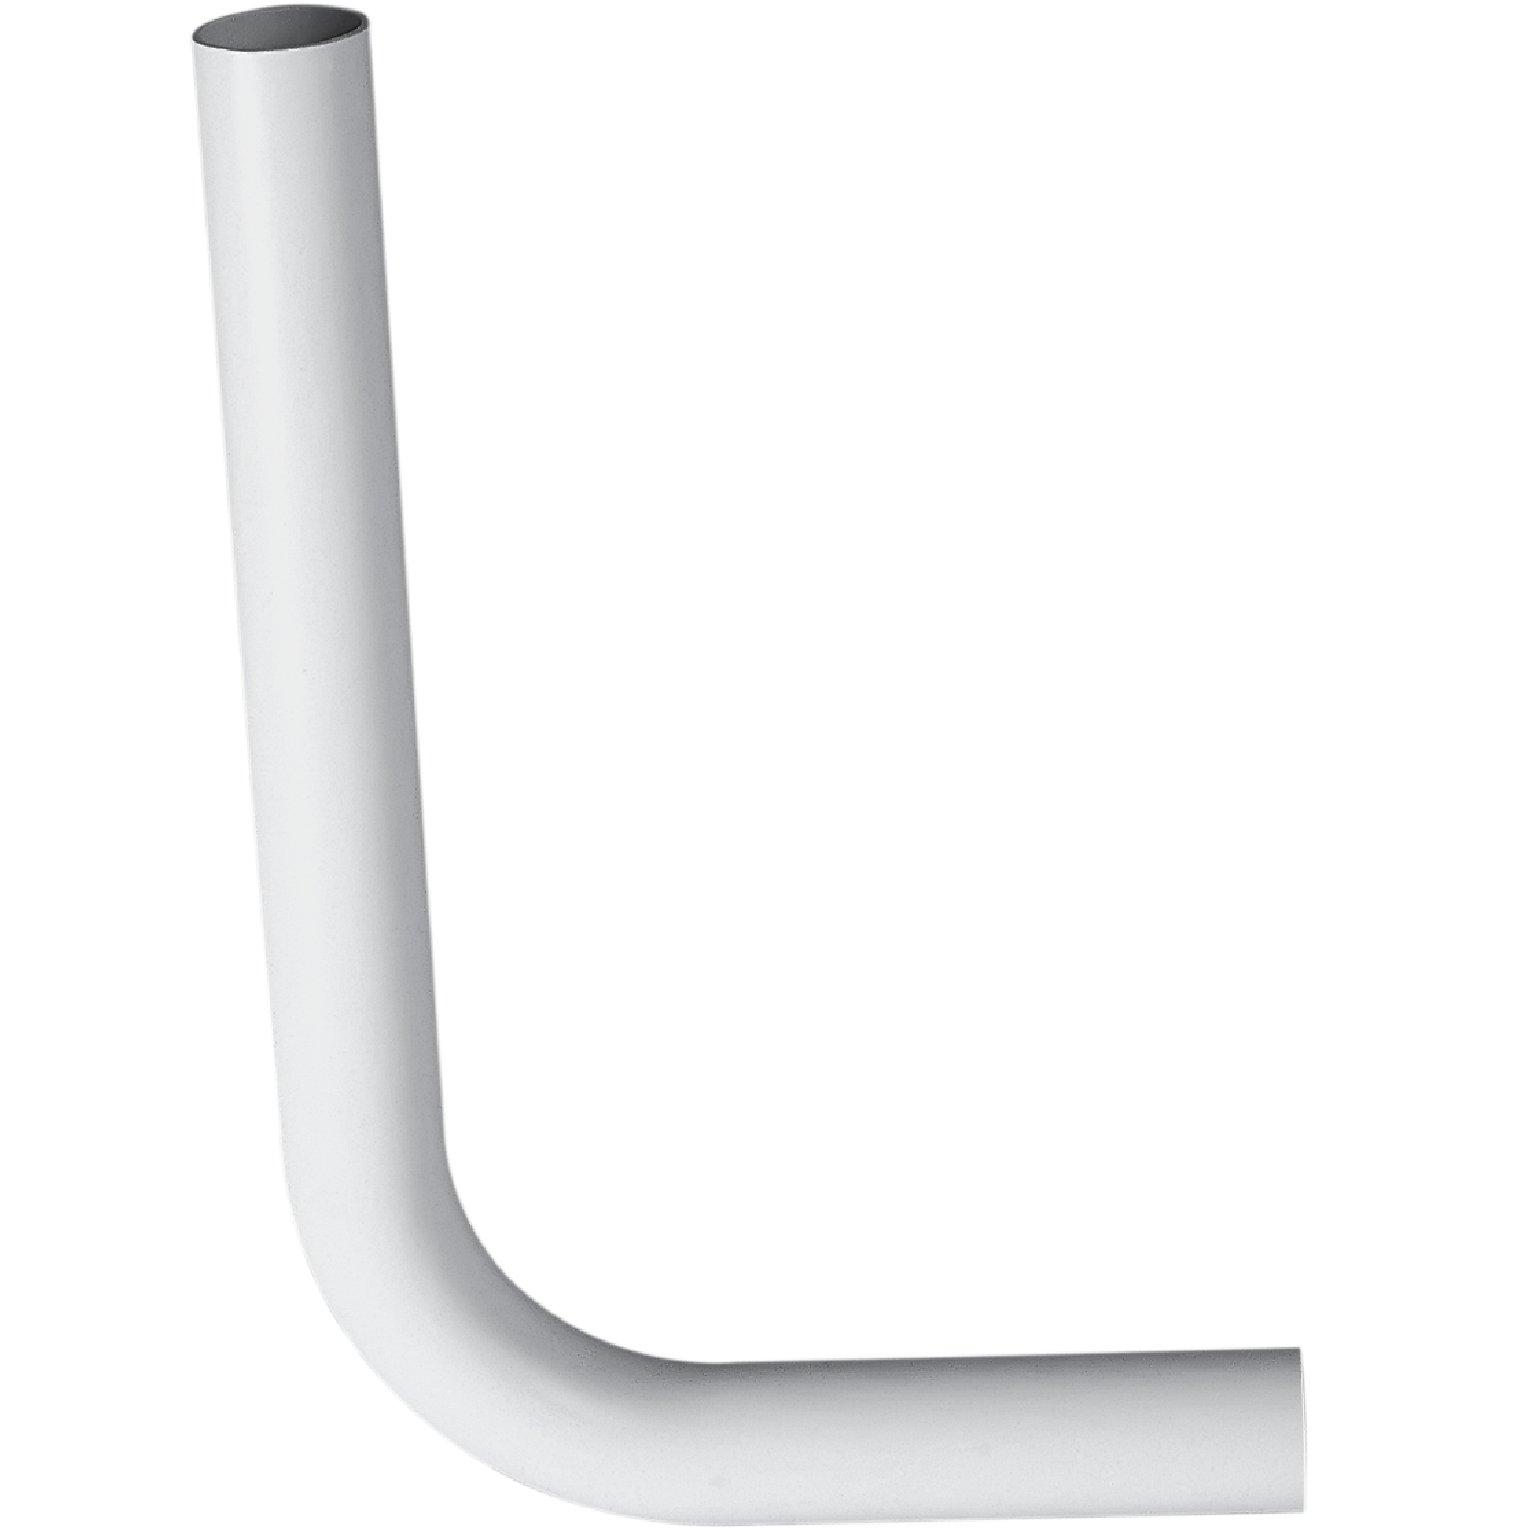 Wirquin Macdee 14" x 9" Standard Low Level Flushpipe White DFP01WH